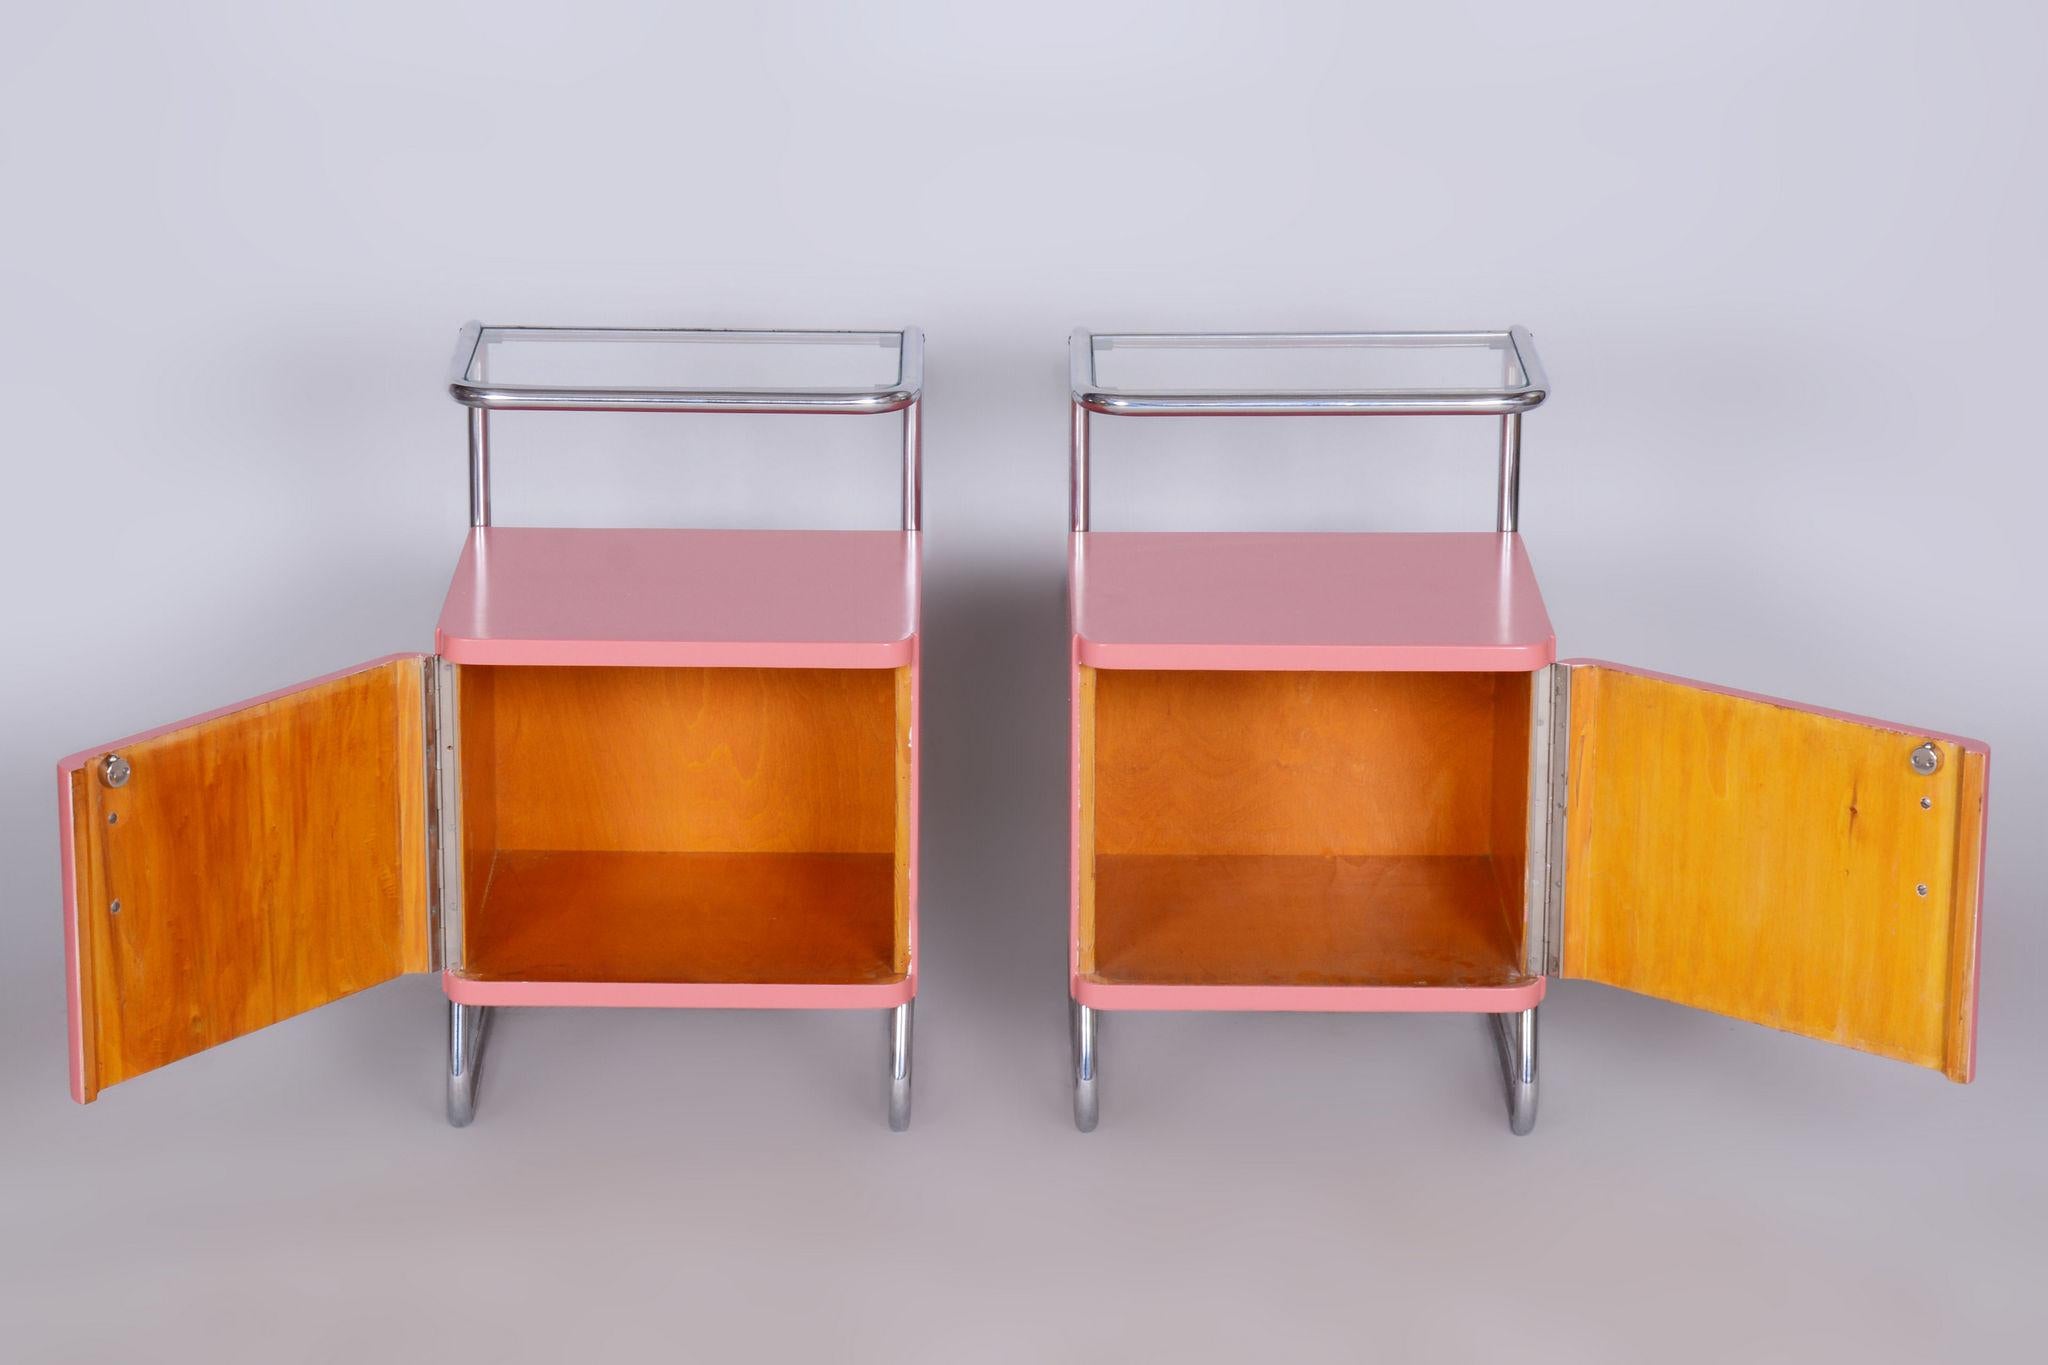 Mid-20th Century Restored Bauhaus Pair of Bed-Side Tables, Chrome-Plated Steel, Czechia, 1940s For Sale